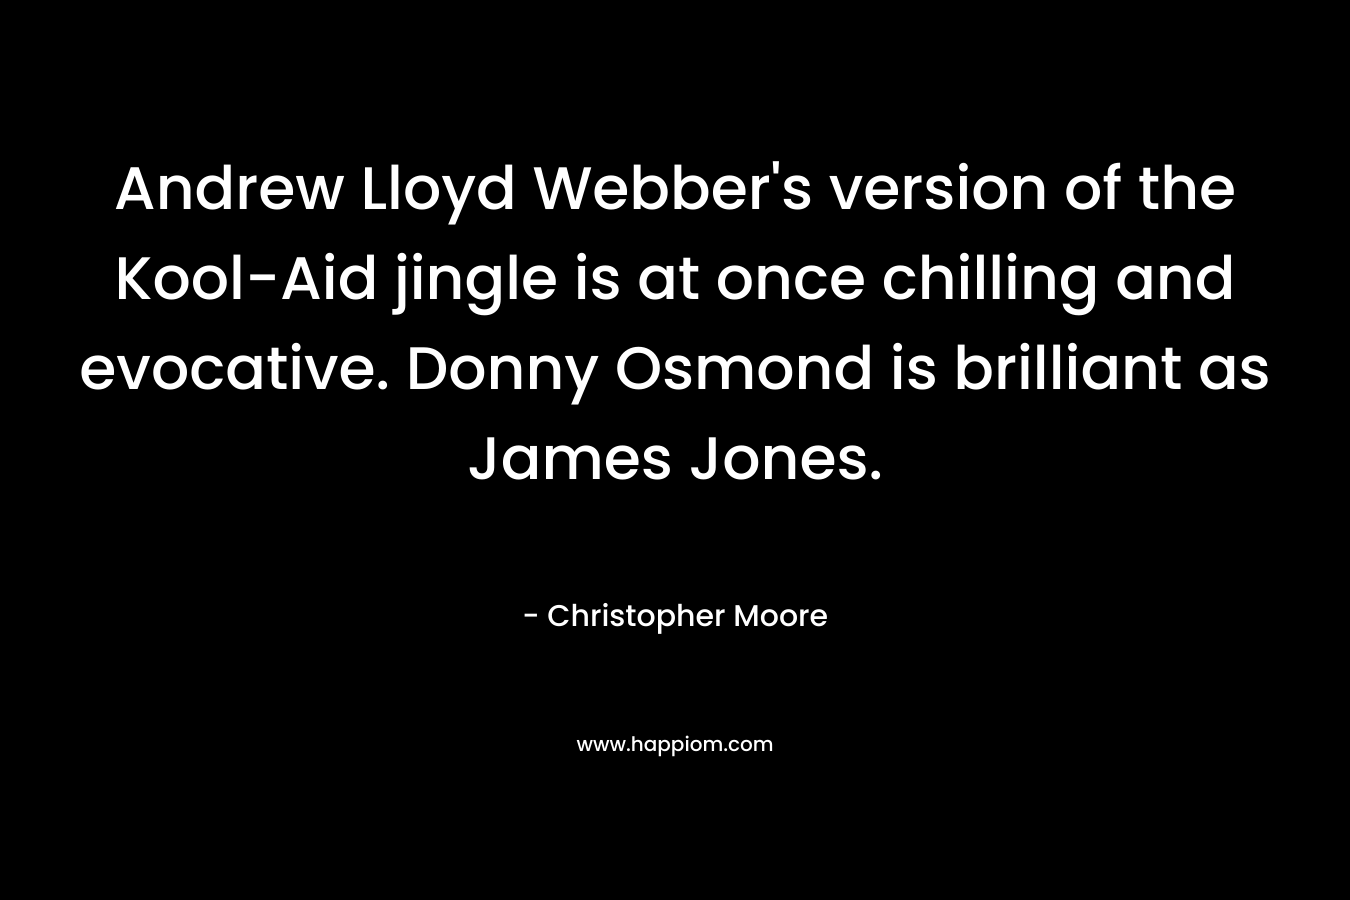 Andrew Lloyd Webber’s version of the Kool-Aid jingle is at once chilling and evocative. Donny Osmond is brilliant as James Jones. – Christopher Moore